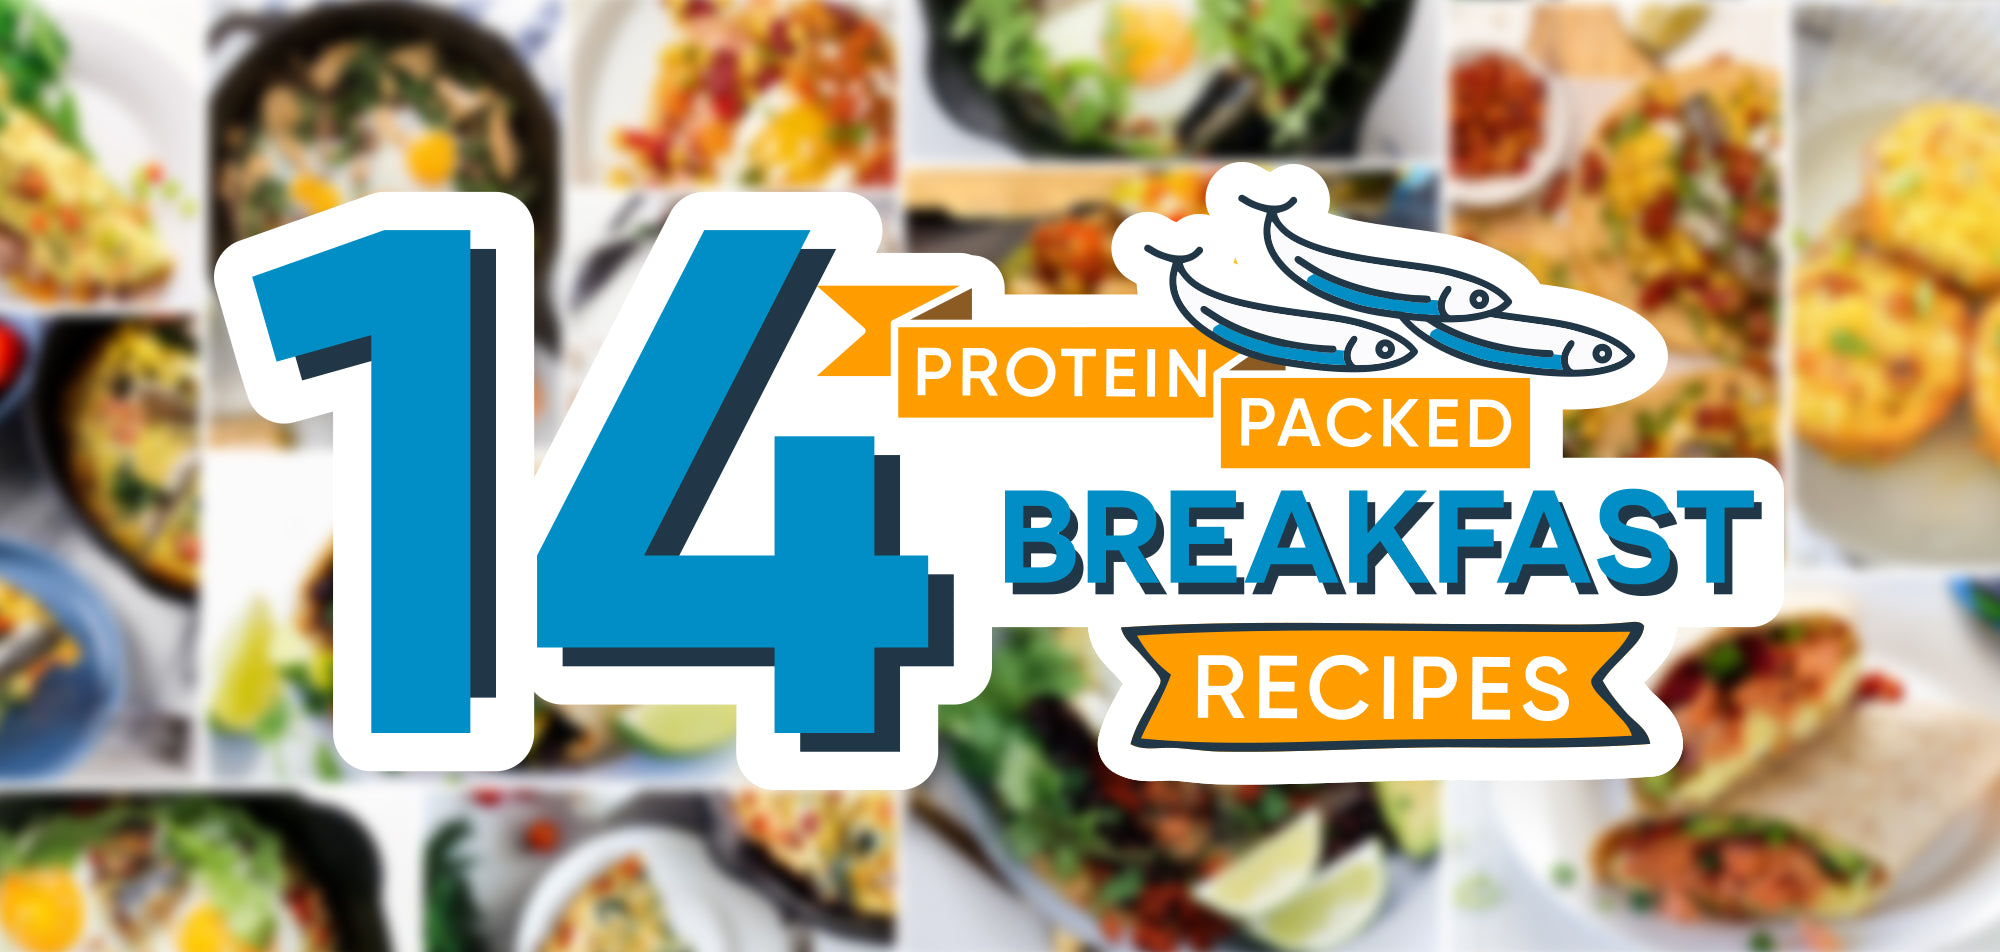 14 Protein-Packed Seafood Breakfast Recipes